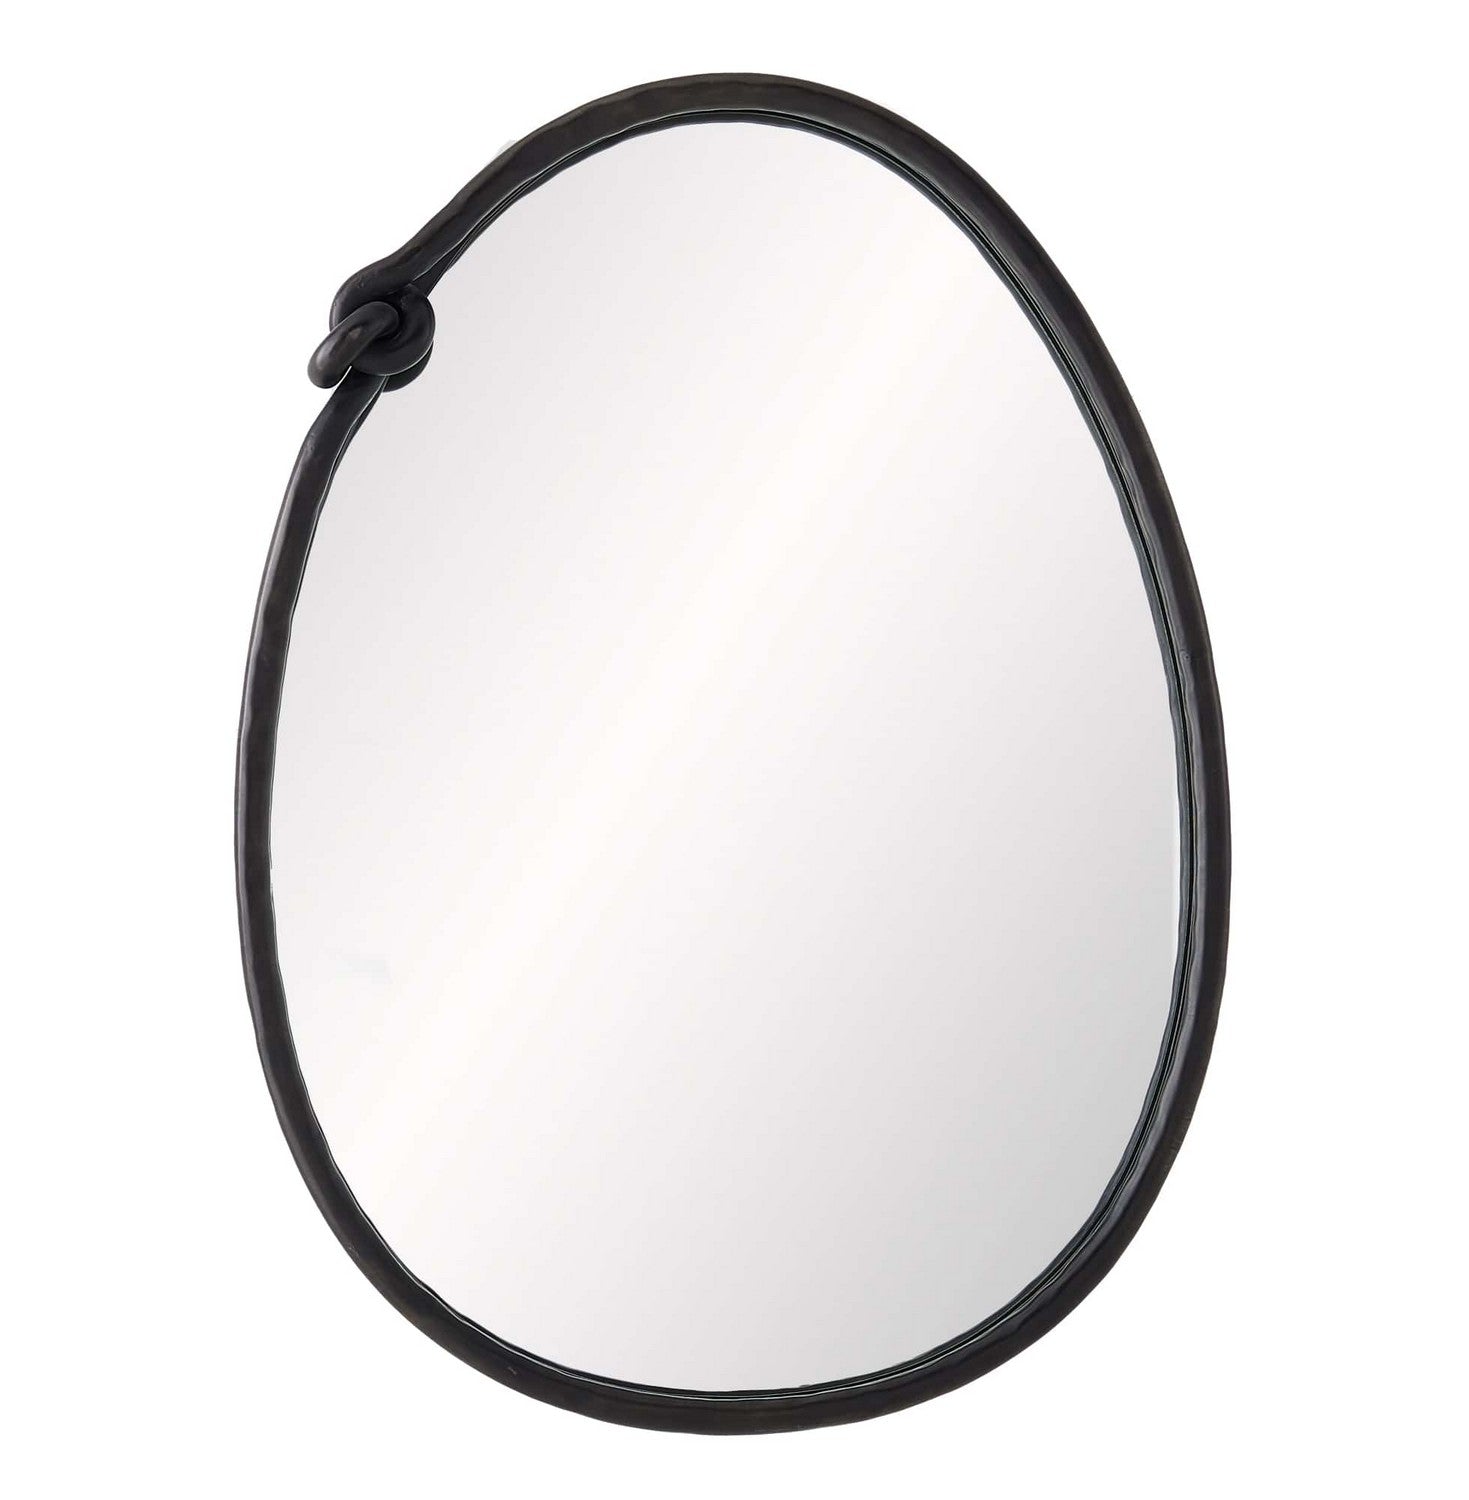 Mirror from the Voltaire collection in Blackened Iron finish